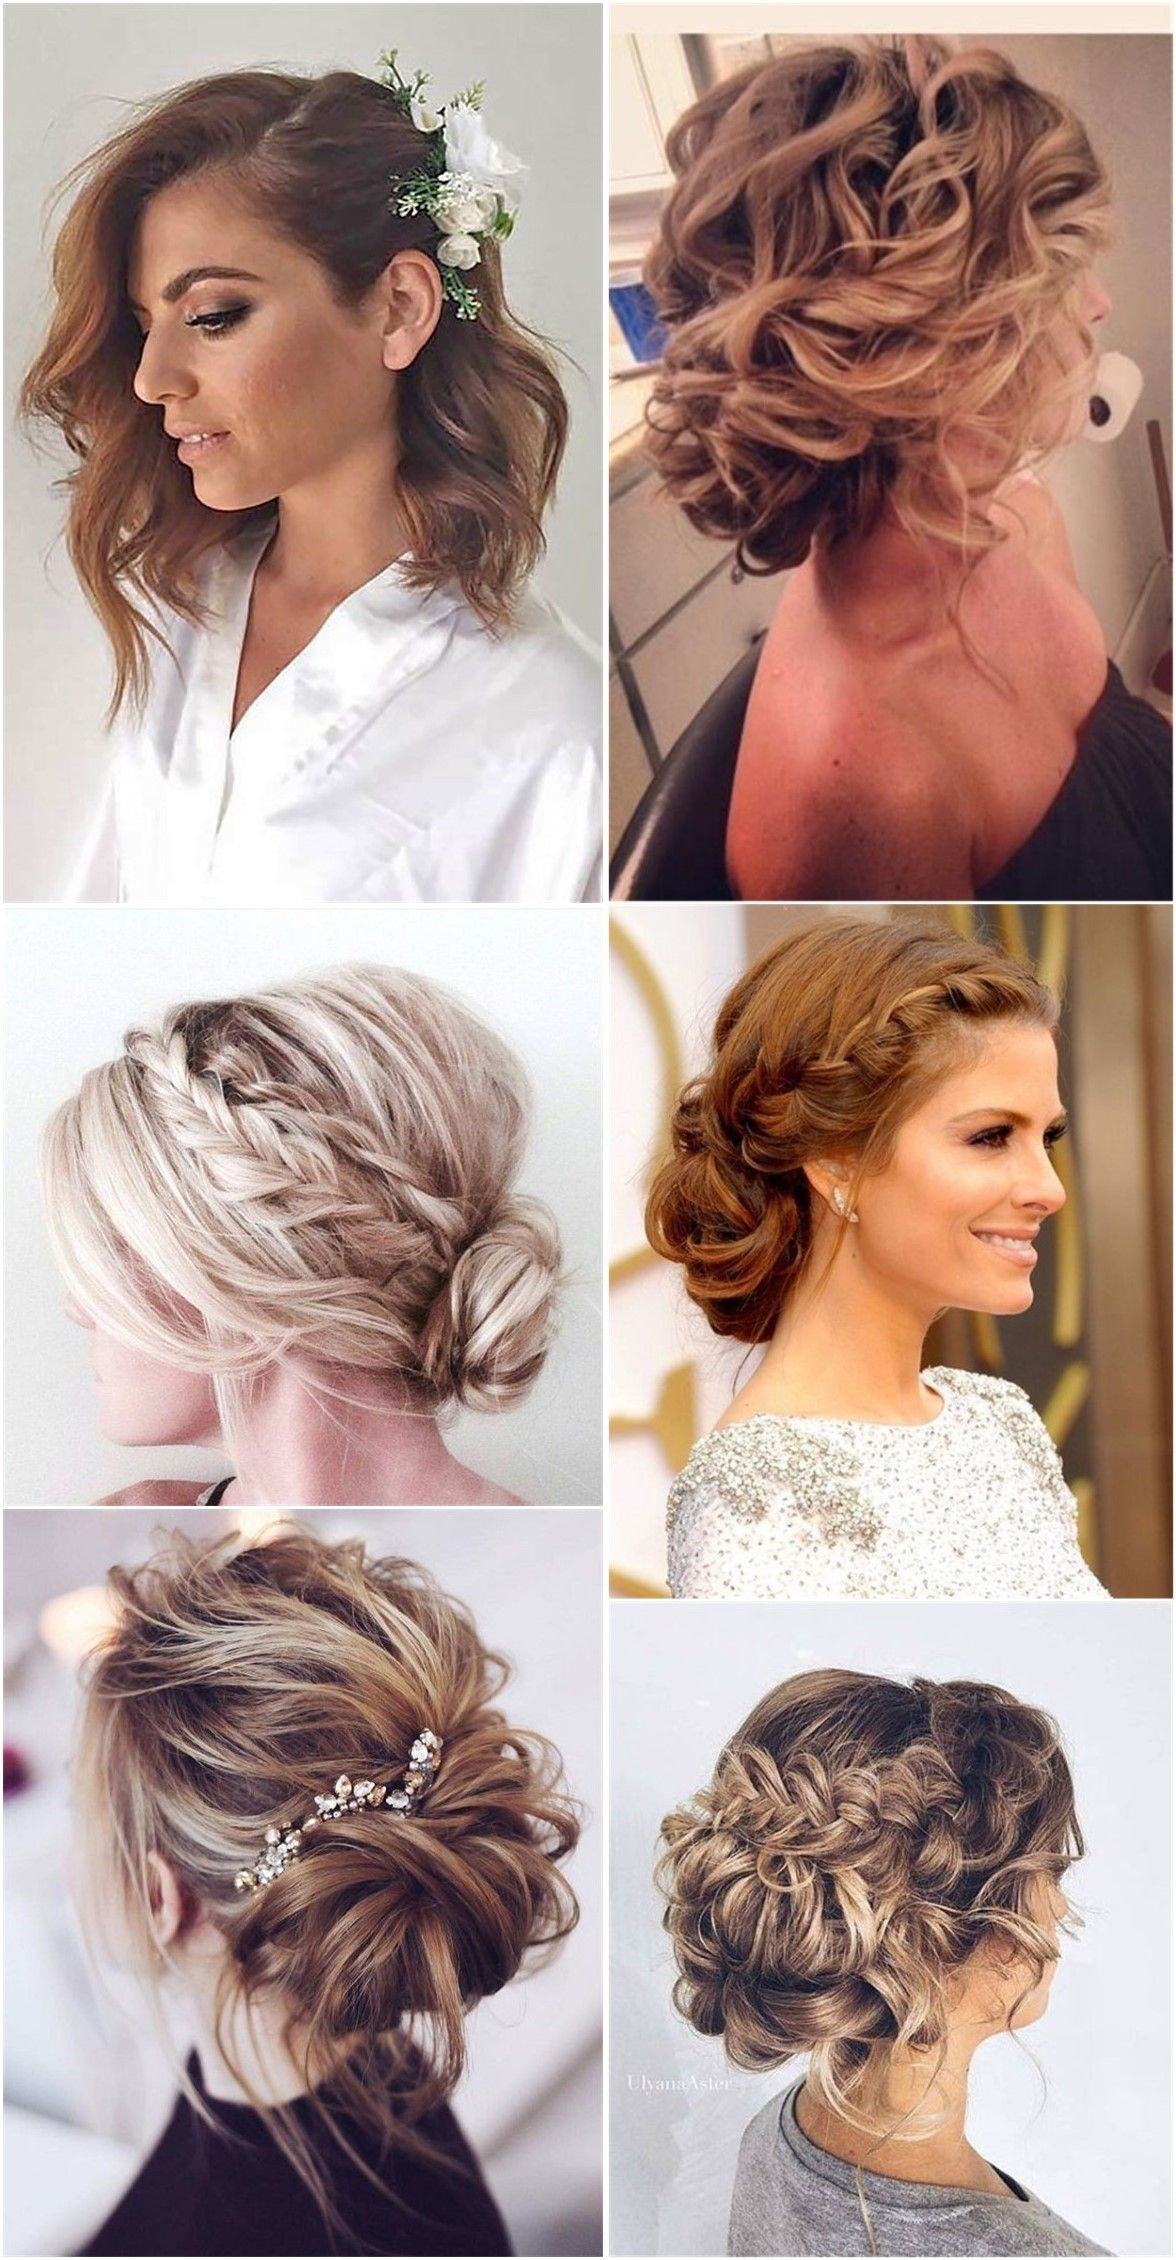 Wedding Hairstyles For Short To Medium Length Hair
 24 Lovely Medium length Hairstyles For 2020 Weddings con